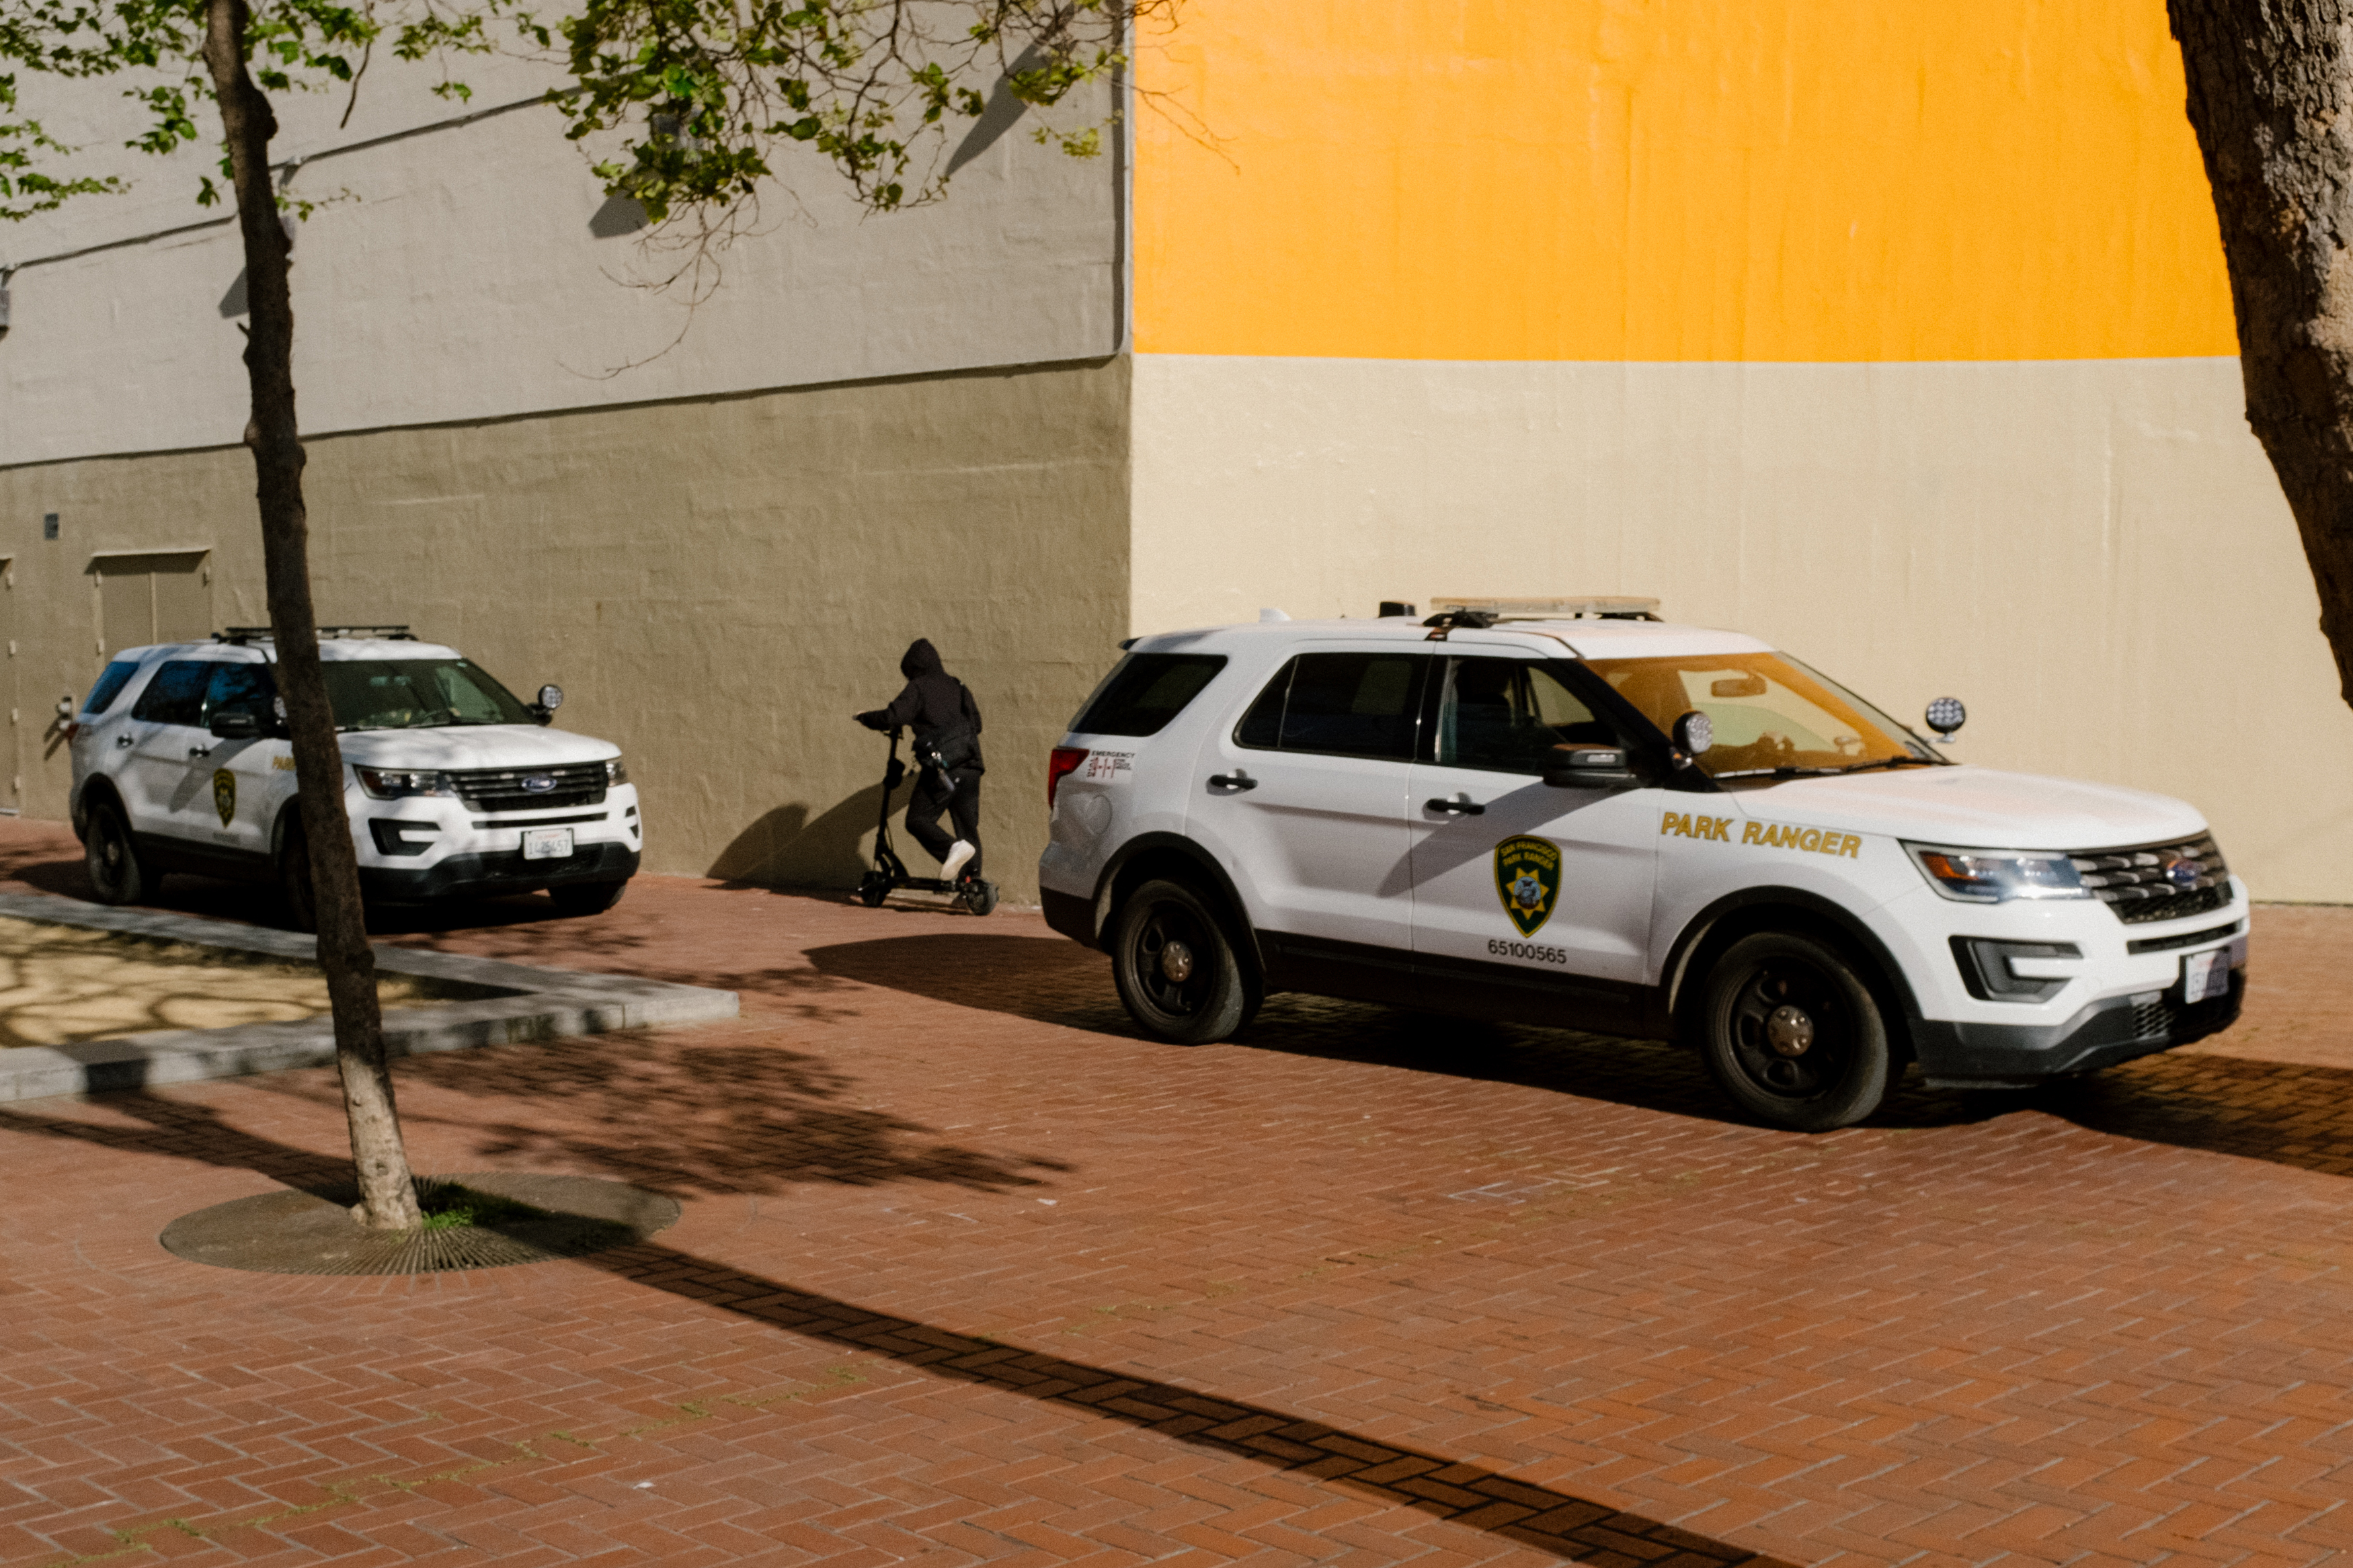 A person on a scooter passes by two parked park ranger vehicles near a large orange and white wall.